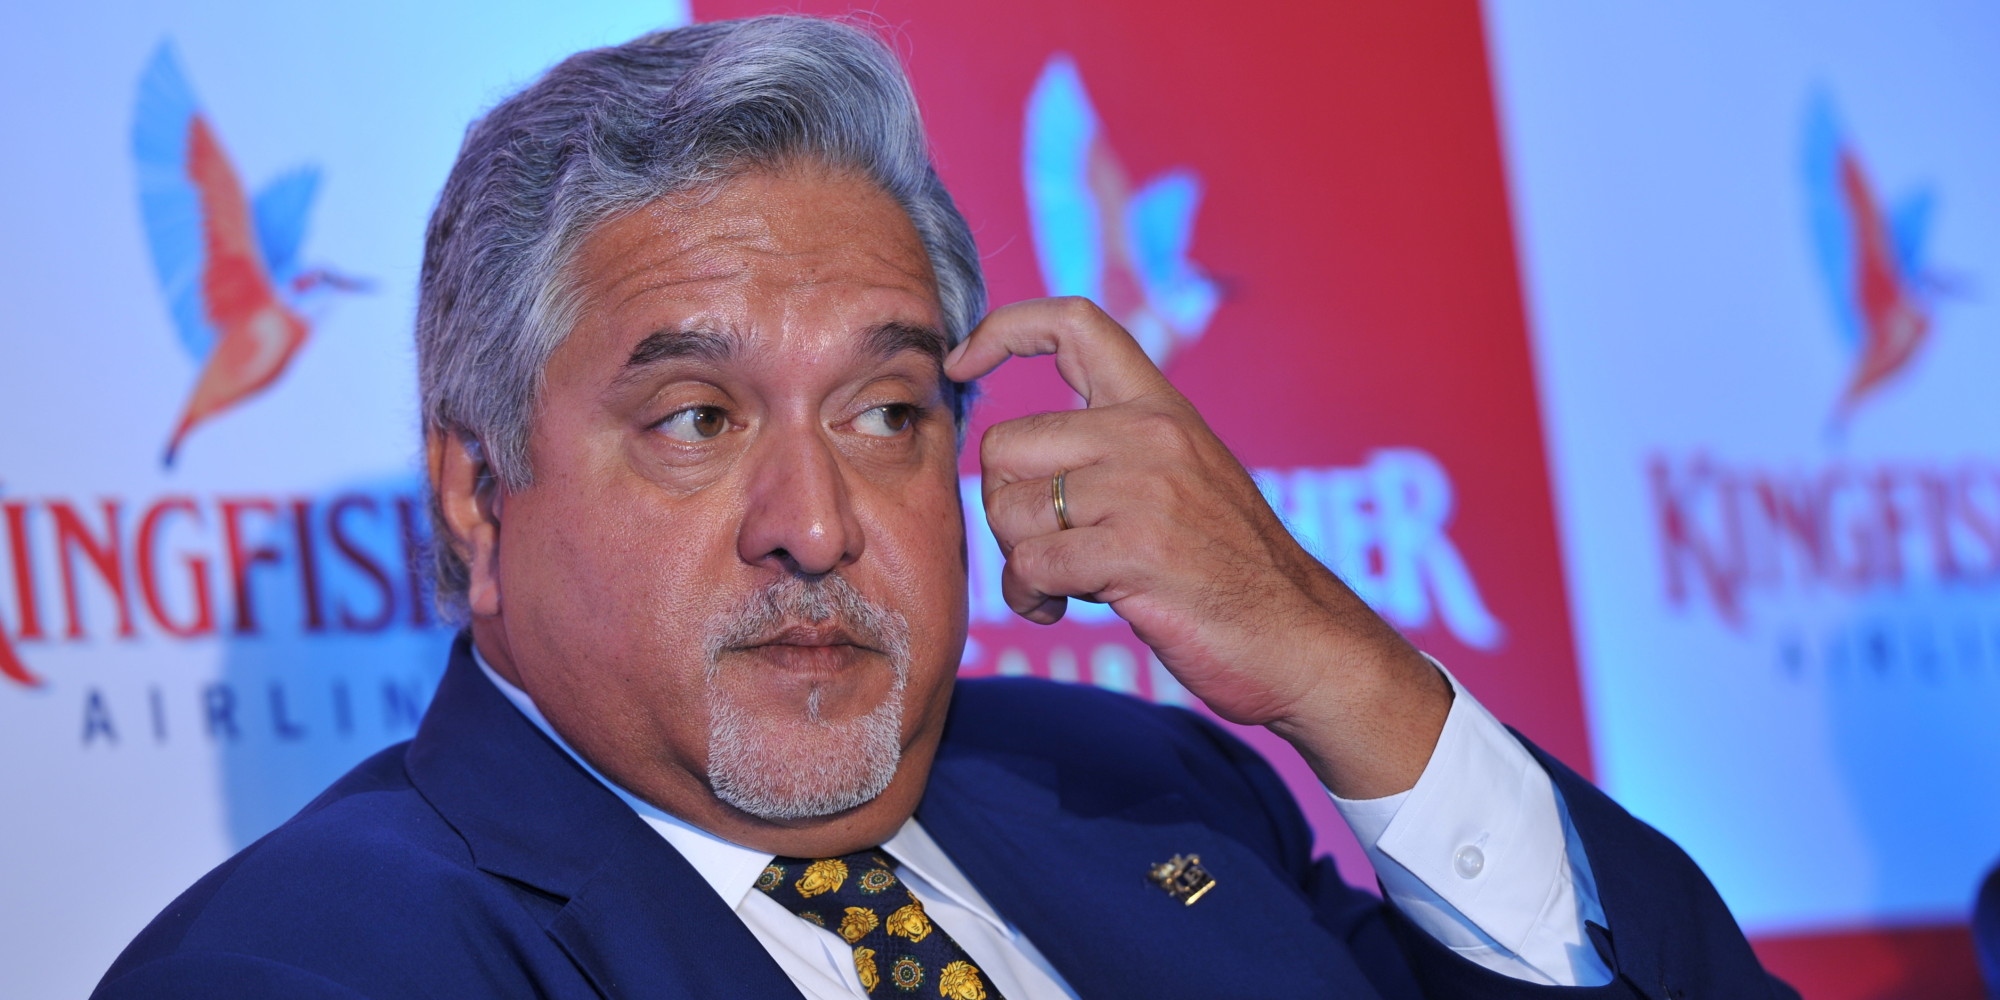 Vijay Mallya, disgraced former chairman of Kingfisher Airlines at press conference.